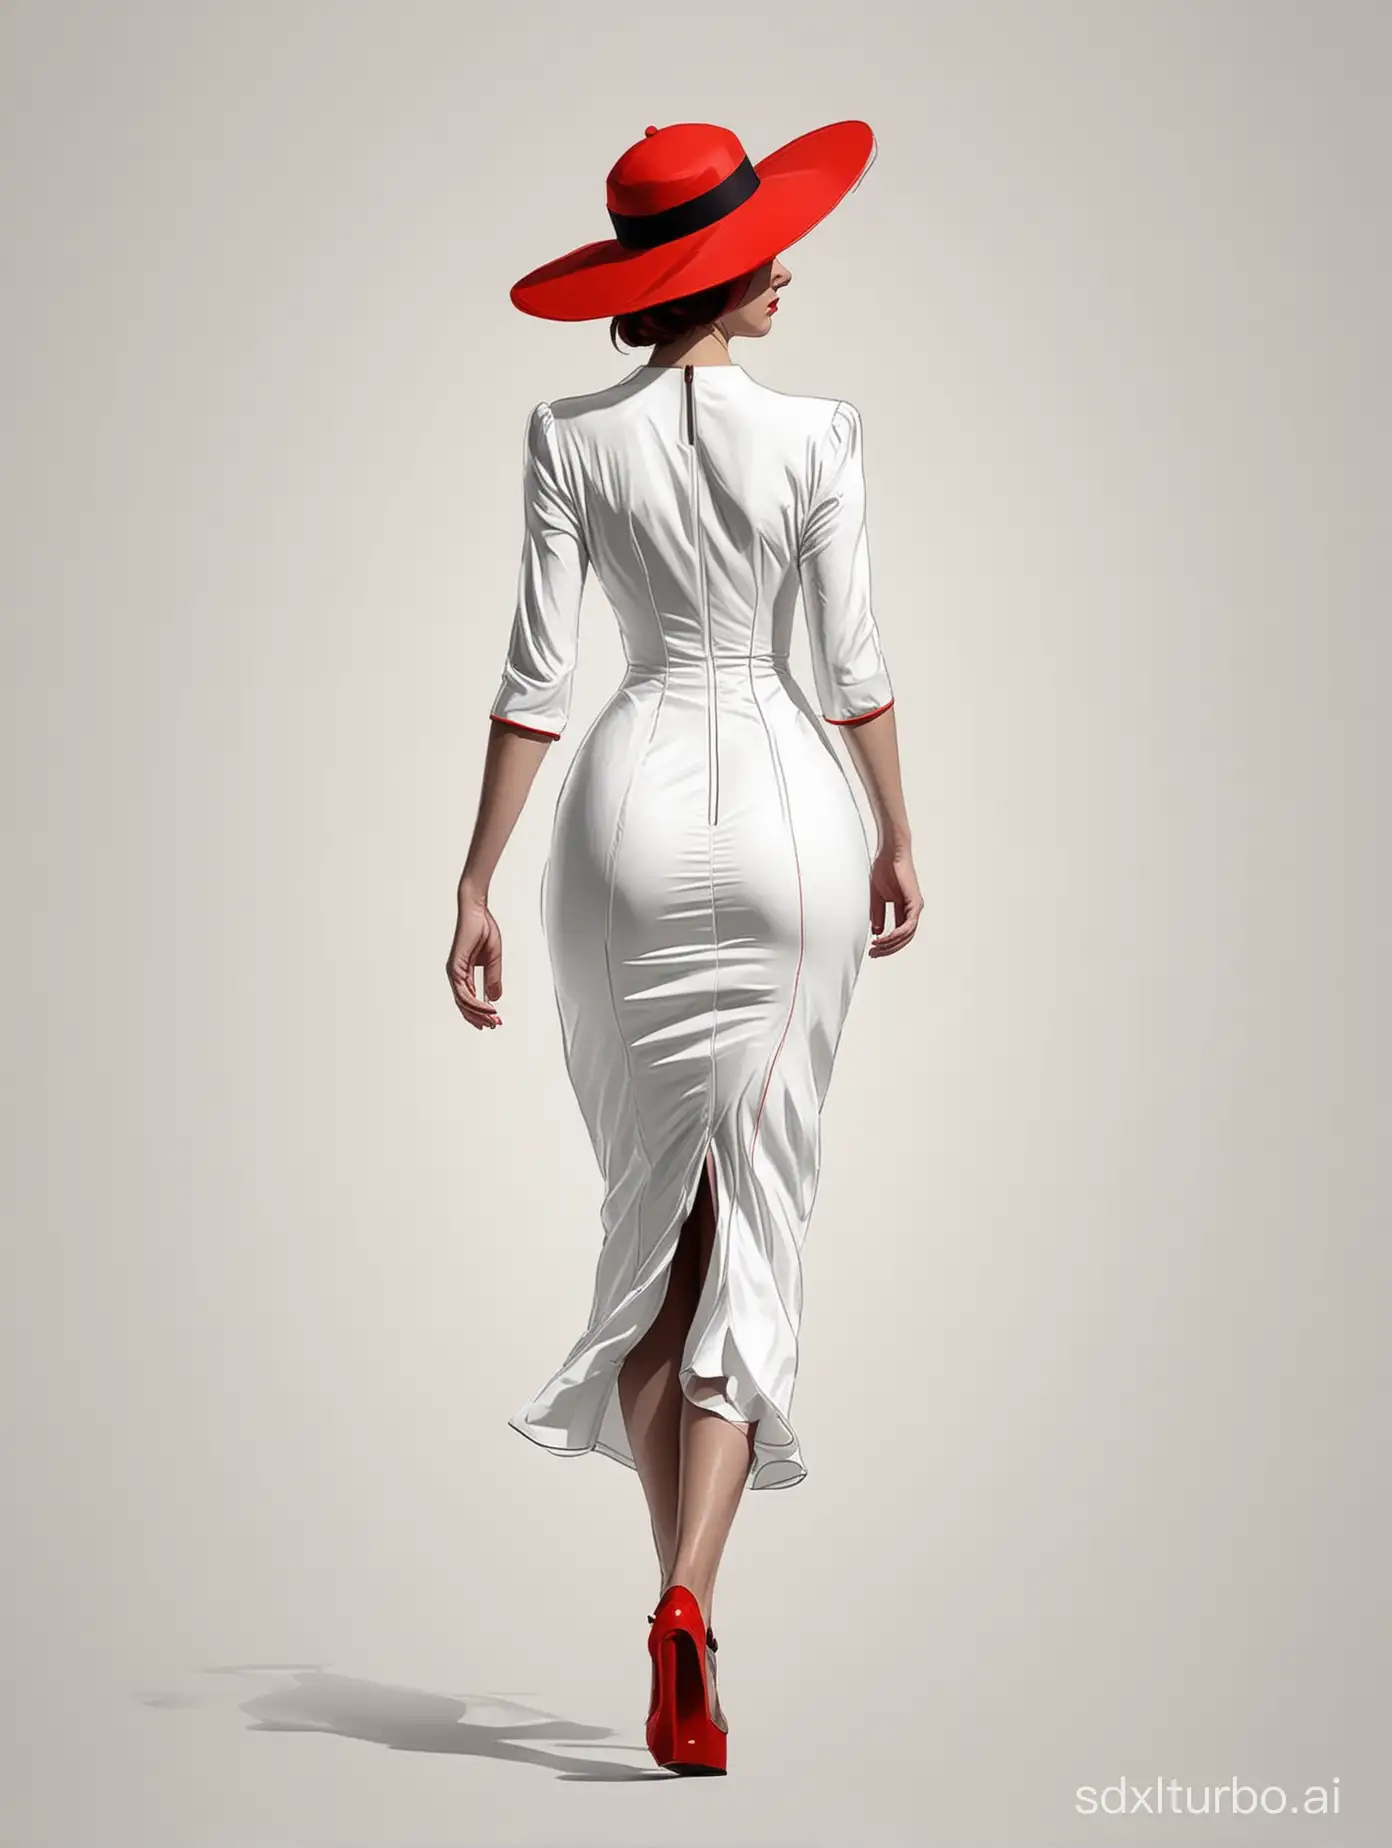 A woman in an elegant white dress and red hat walks along the runway, huge breast，her silhouette outlined with bold lines against a clean background. The minimalist style captures every detail of her figure with simple shapes and clear lines, creating a sense of sophistication that resonates across all art forms. High resolution. Black line illustration in the style of on White Background.